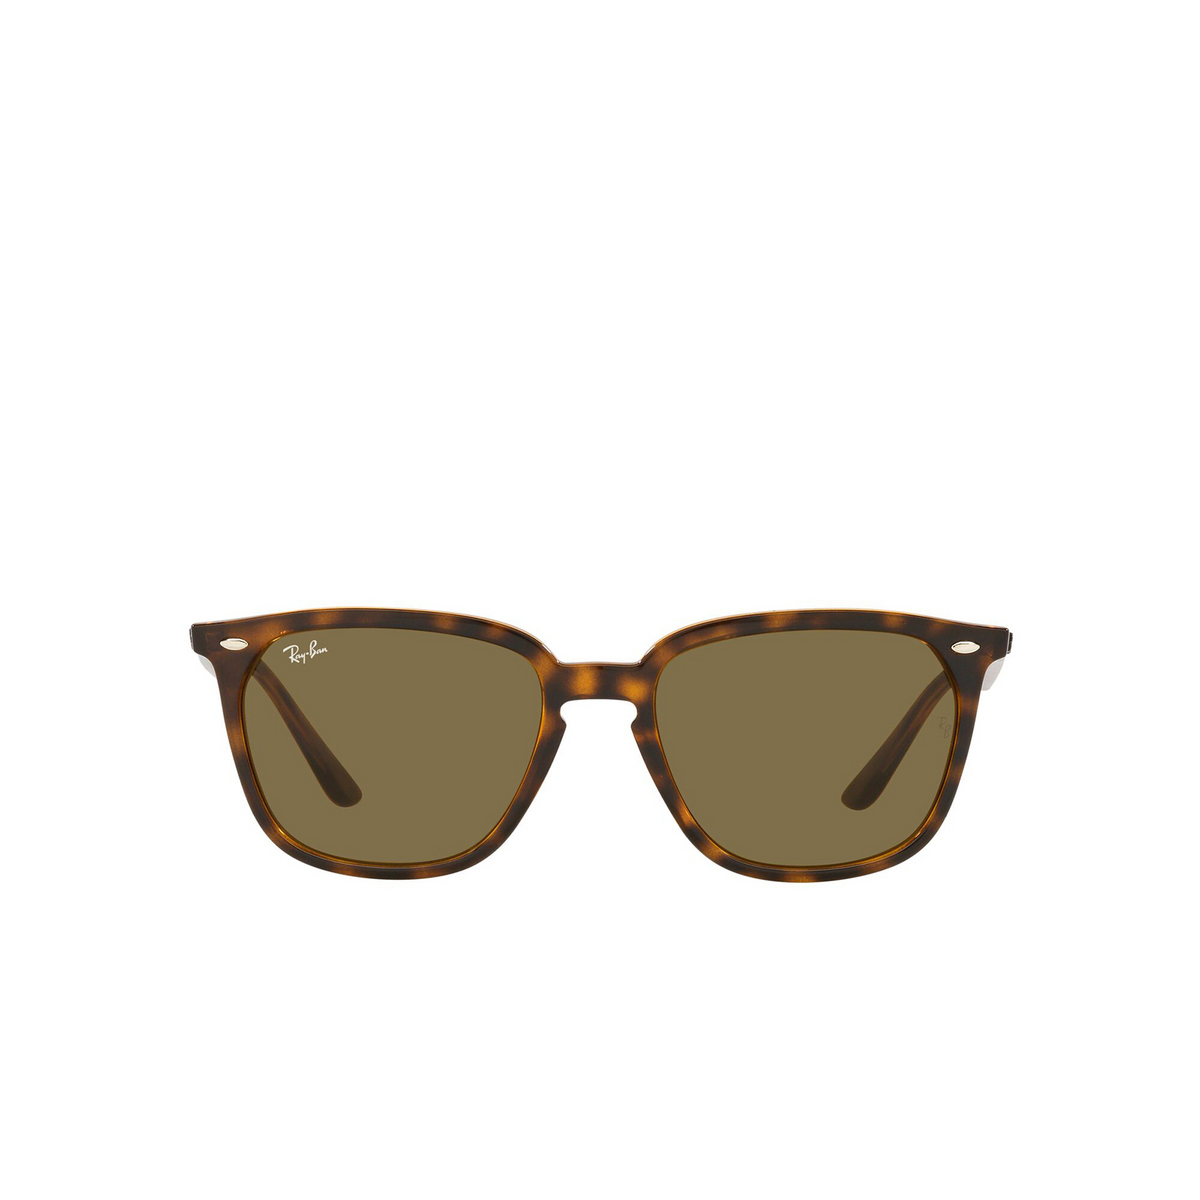 Ray-Ban® Square Sunglasses: RB4362 color Havana 710/73 - front view.